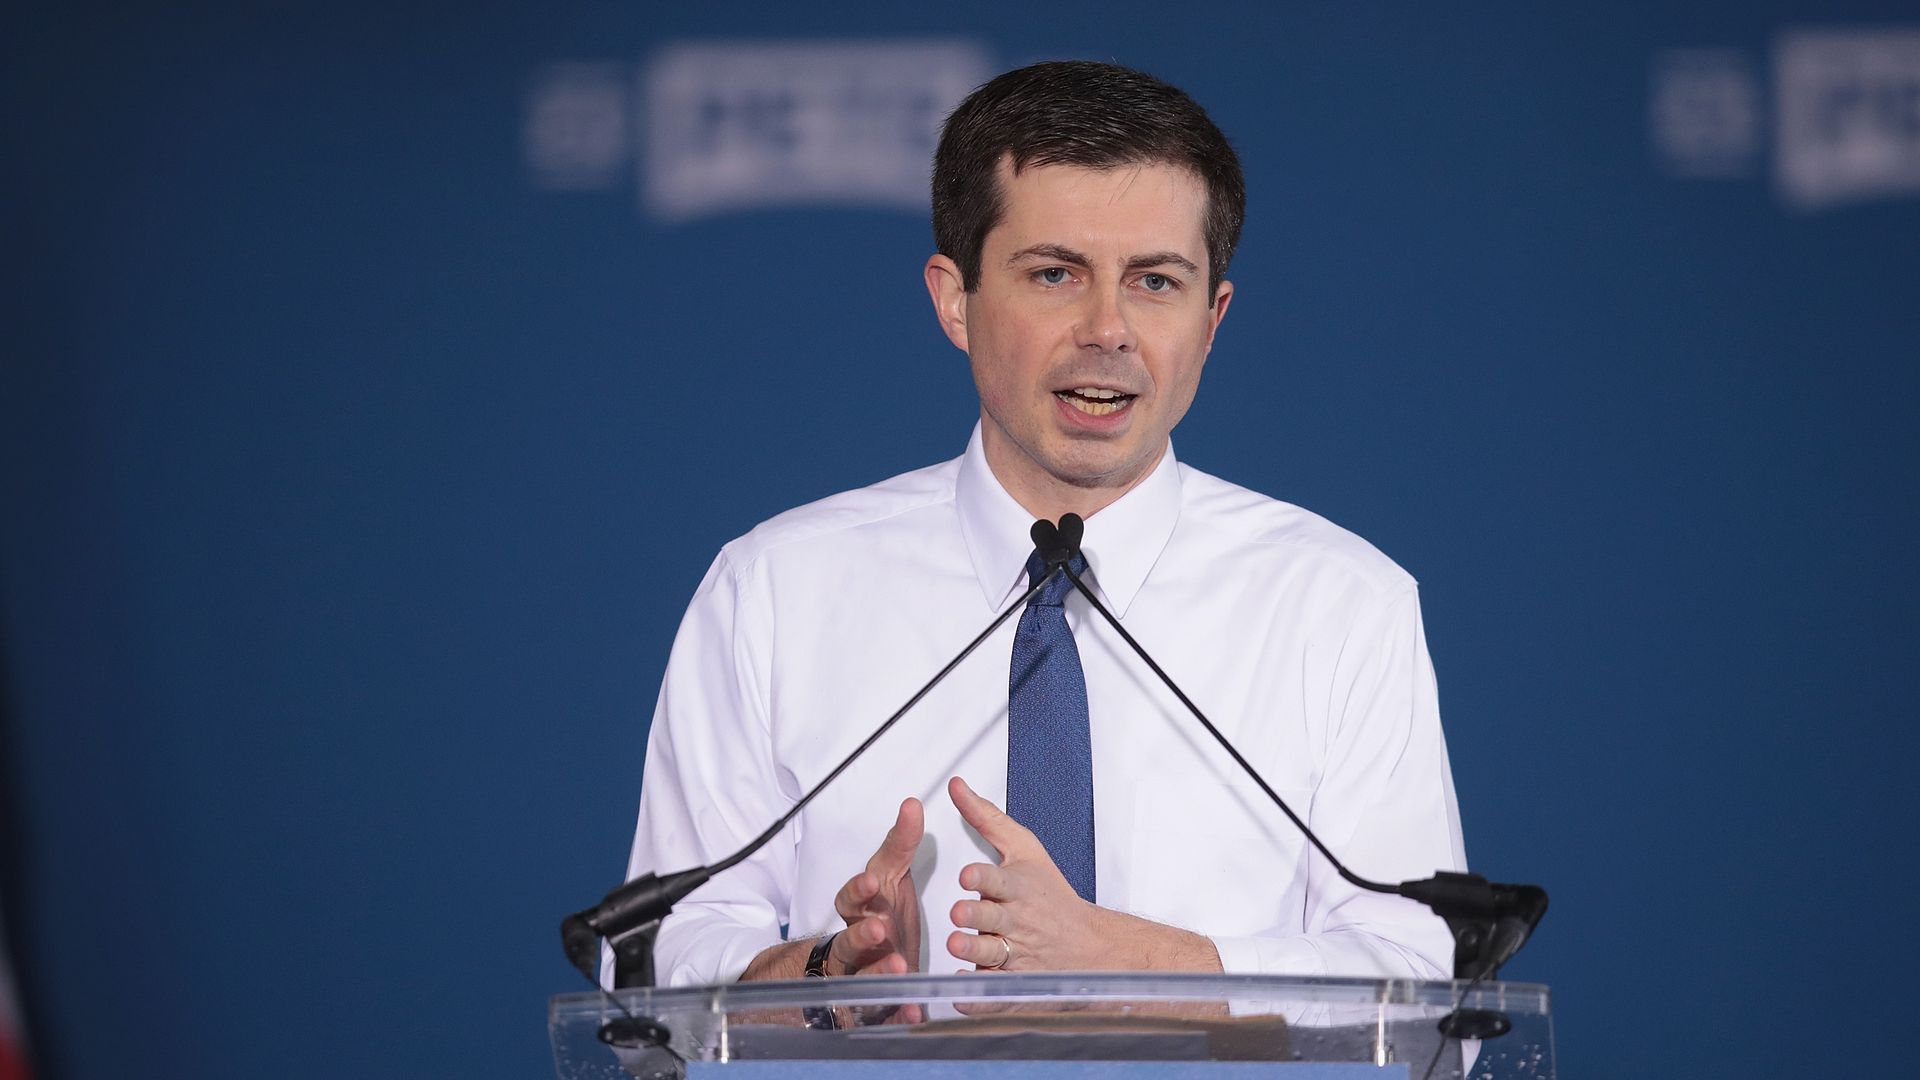 2020 presidential candidate Pete Buttigieg will give back donations from lobbyists - Axios